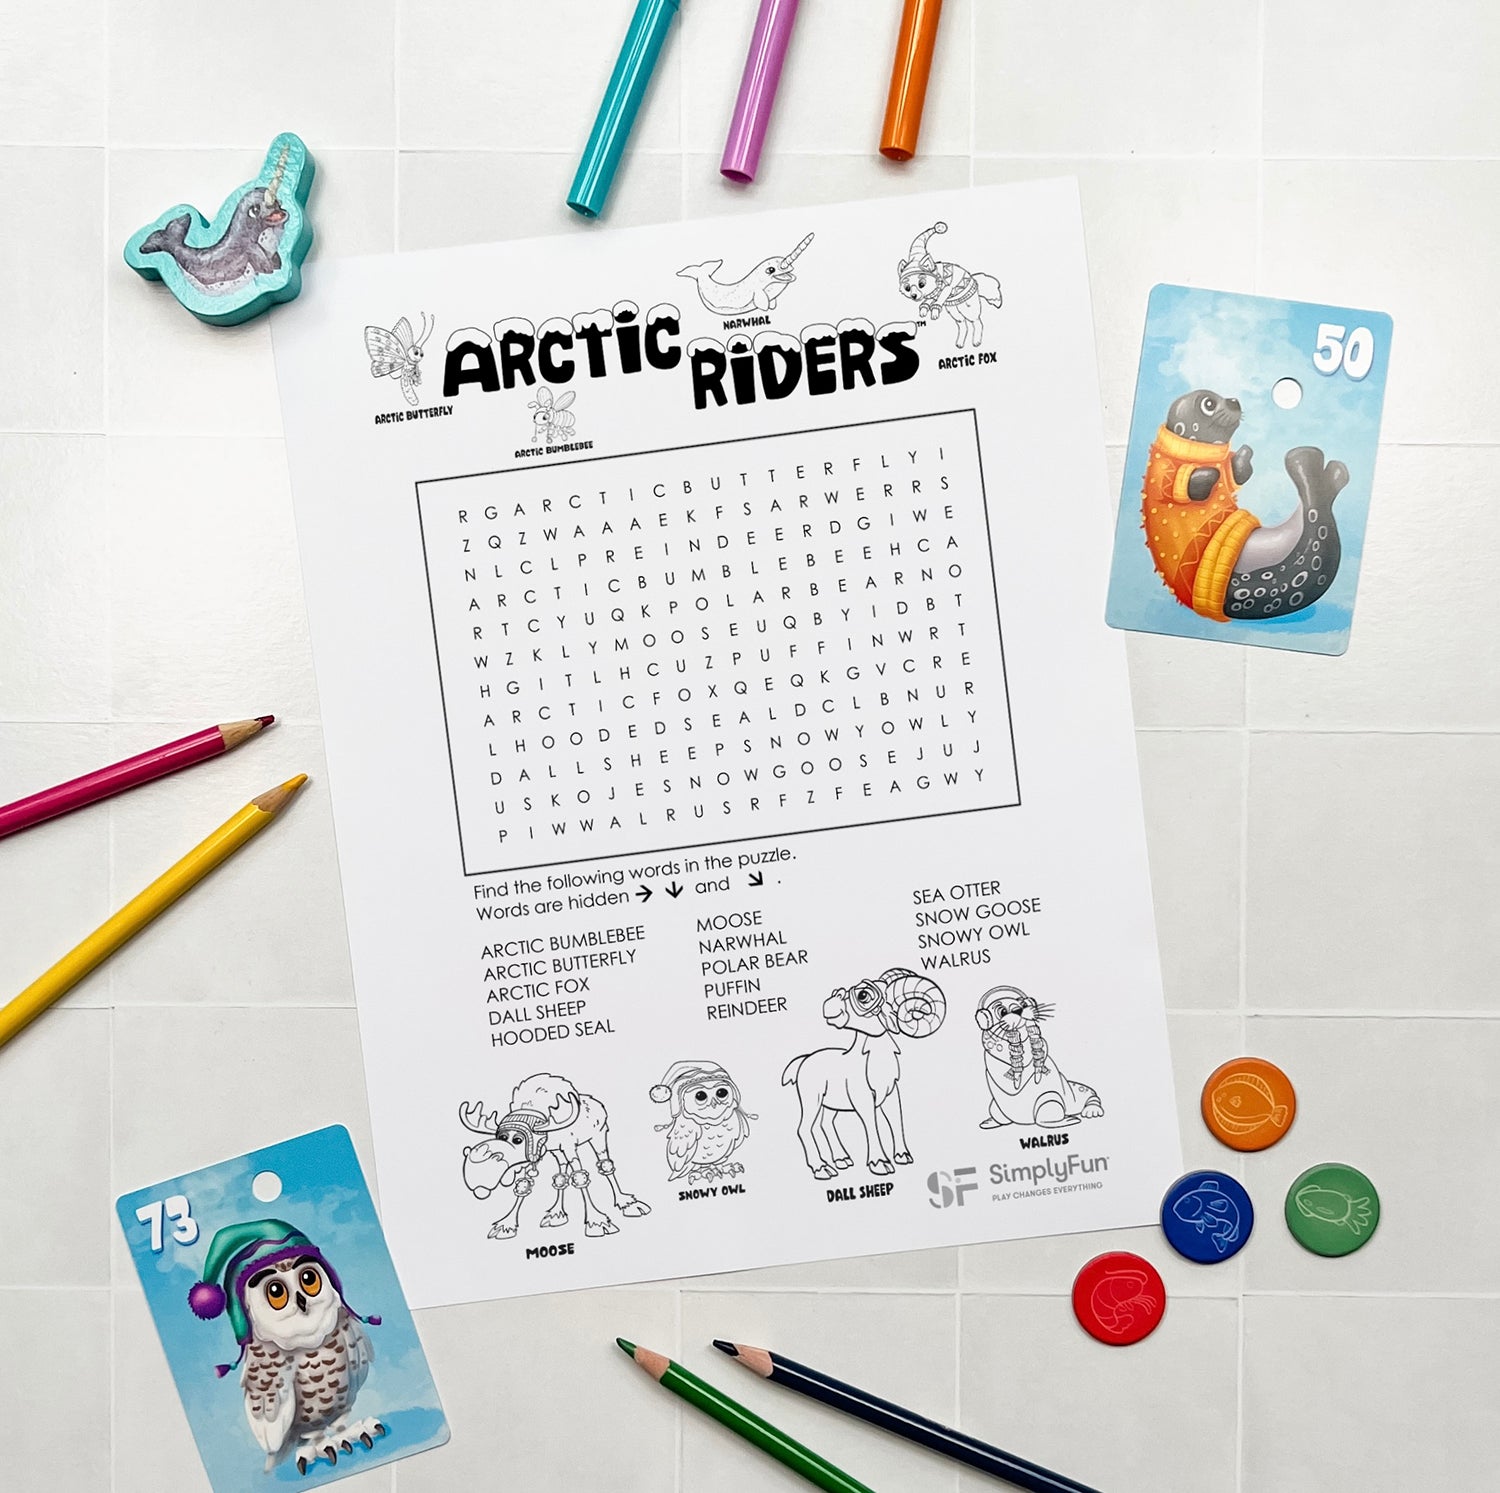 Free downloadable activities for kids by SimplyFun